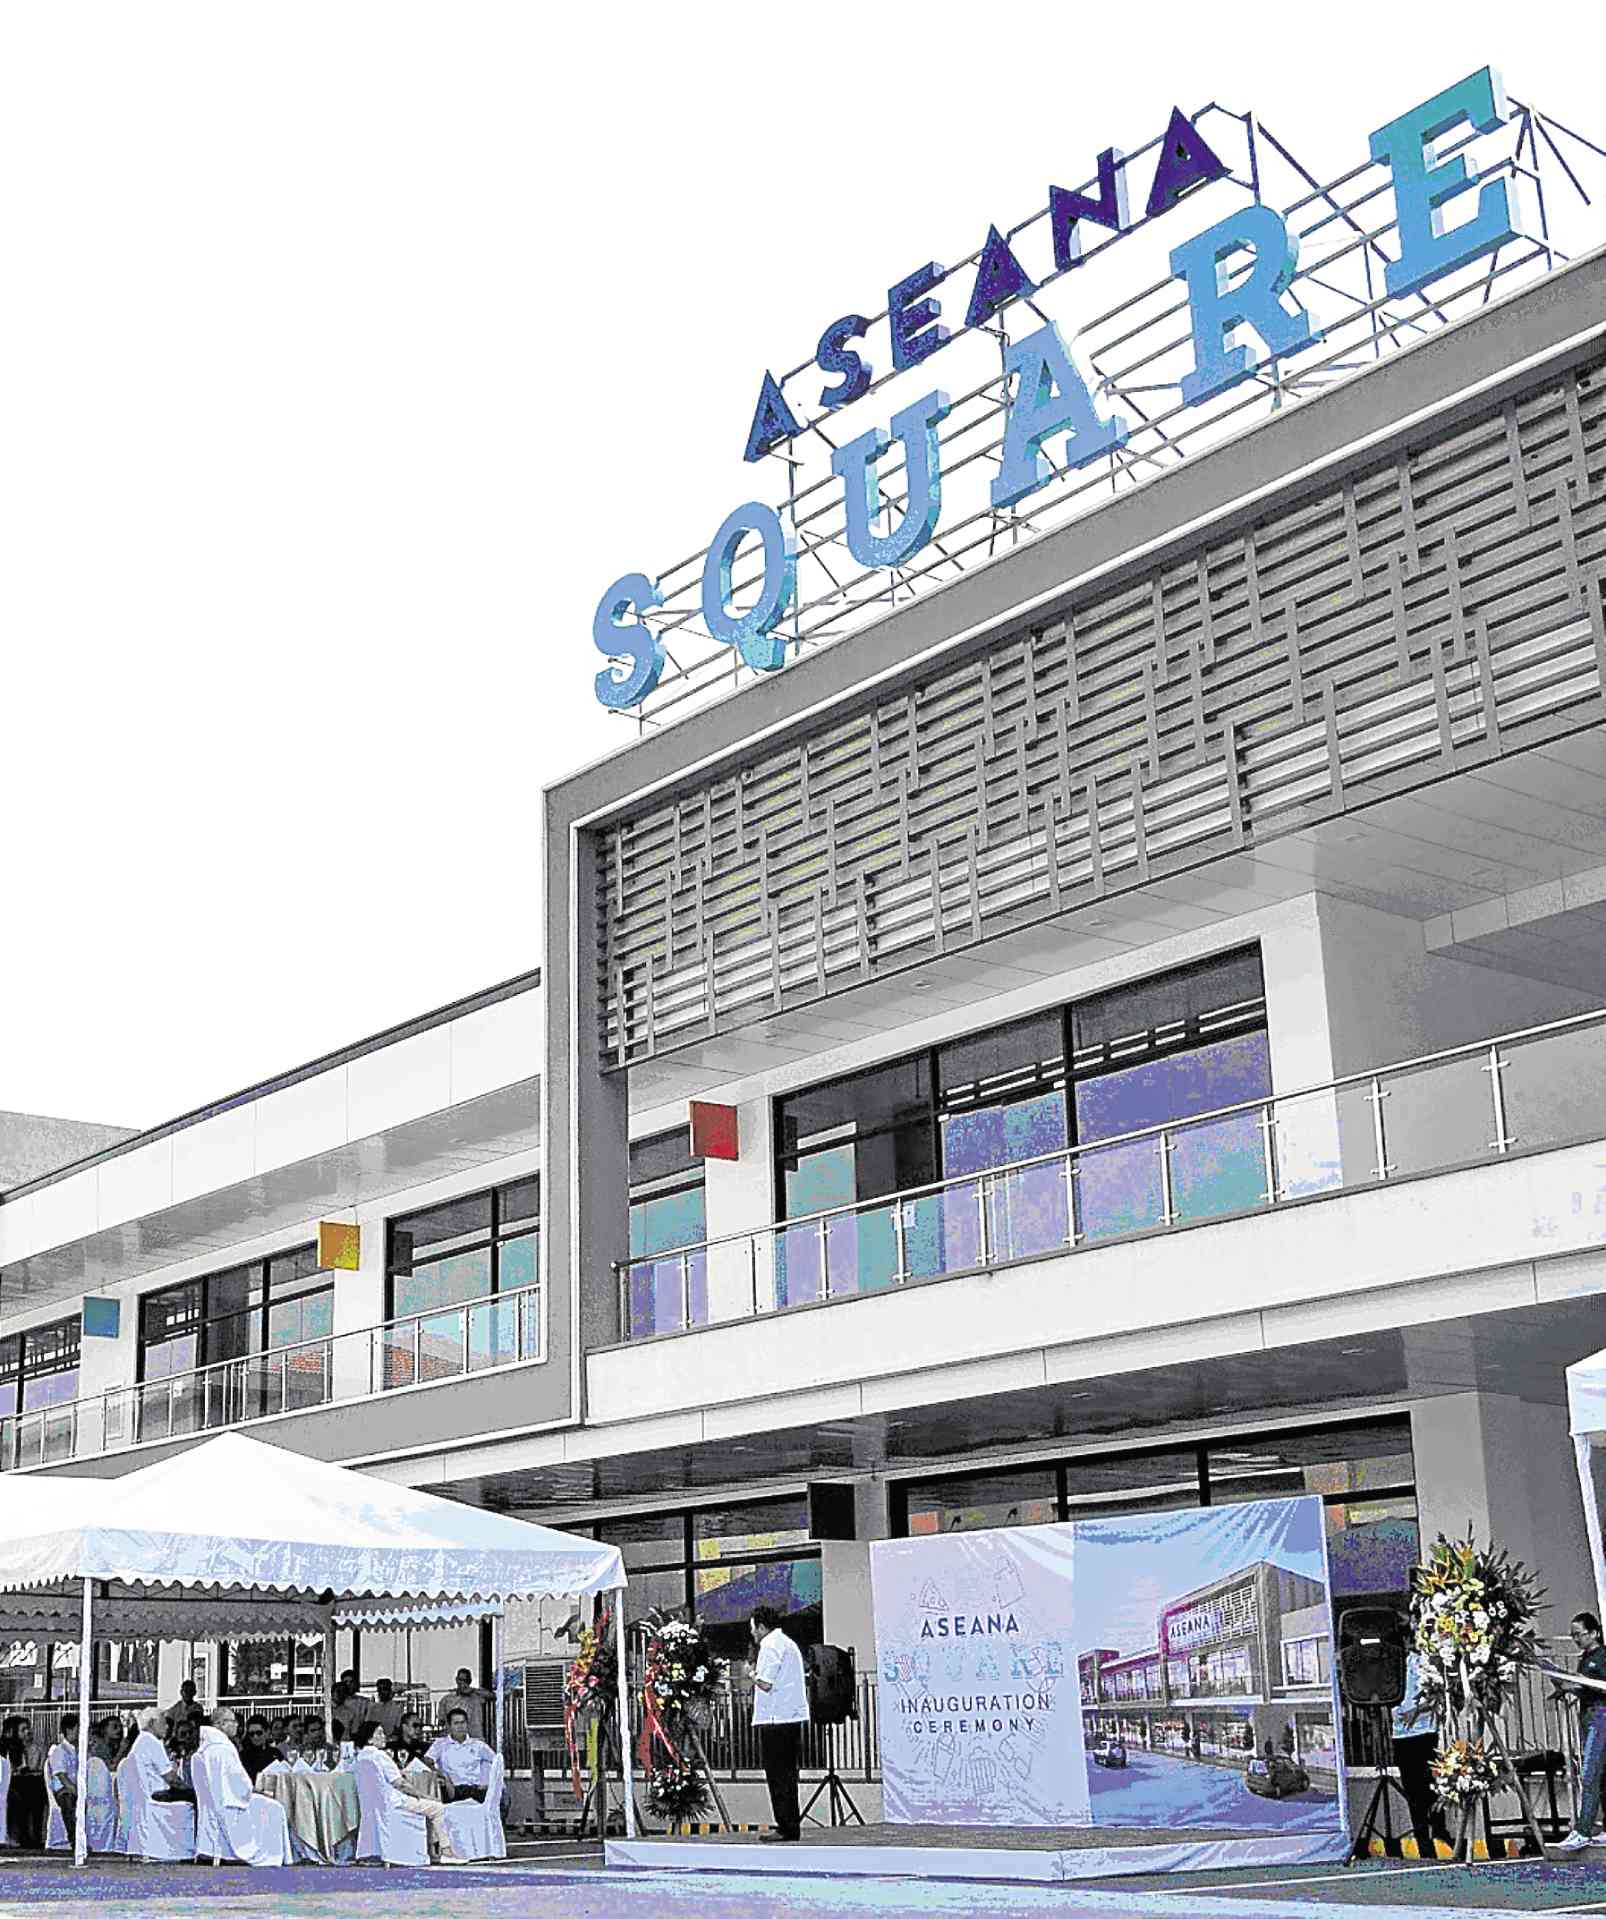 Aseana City primed for exponential growth